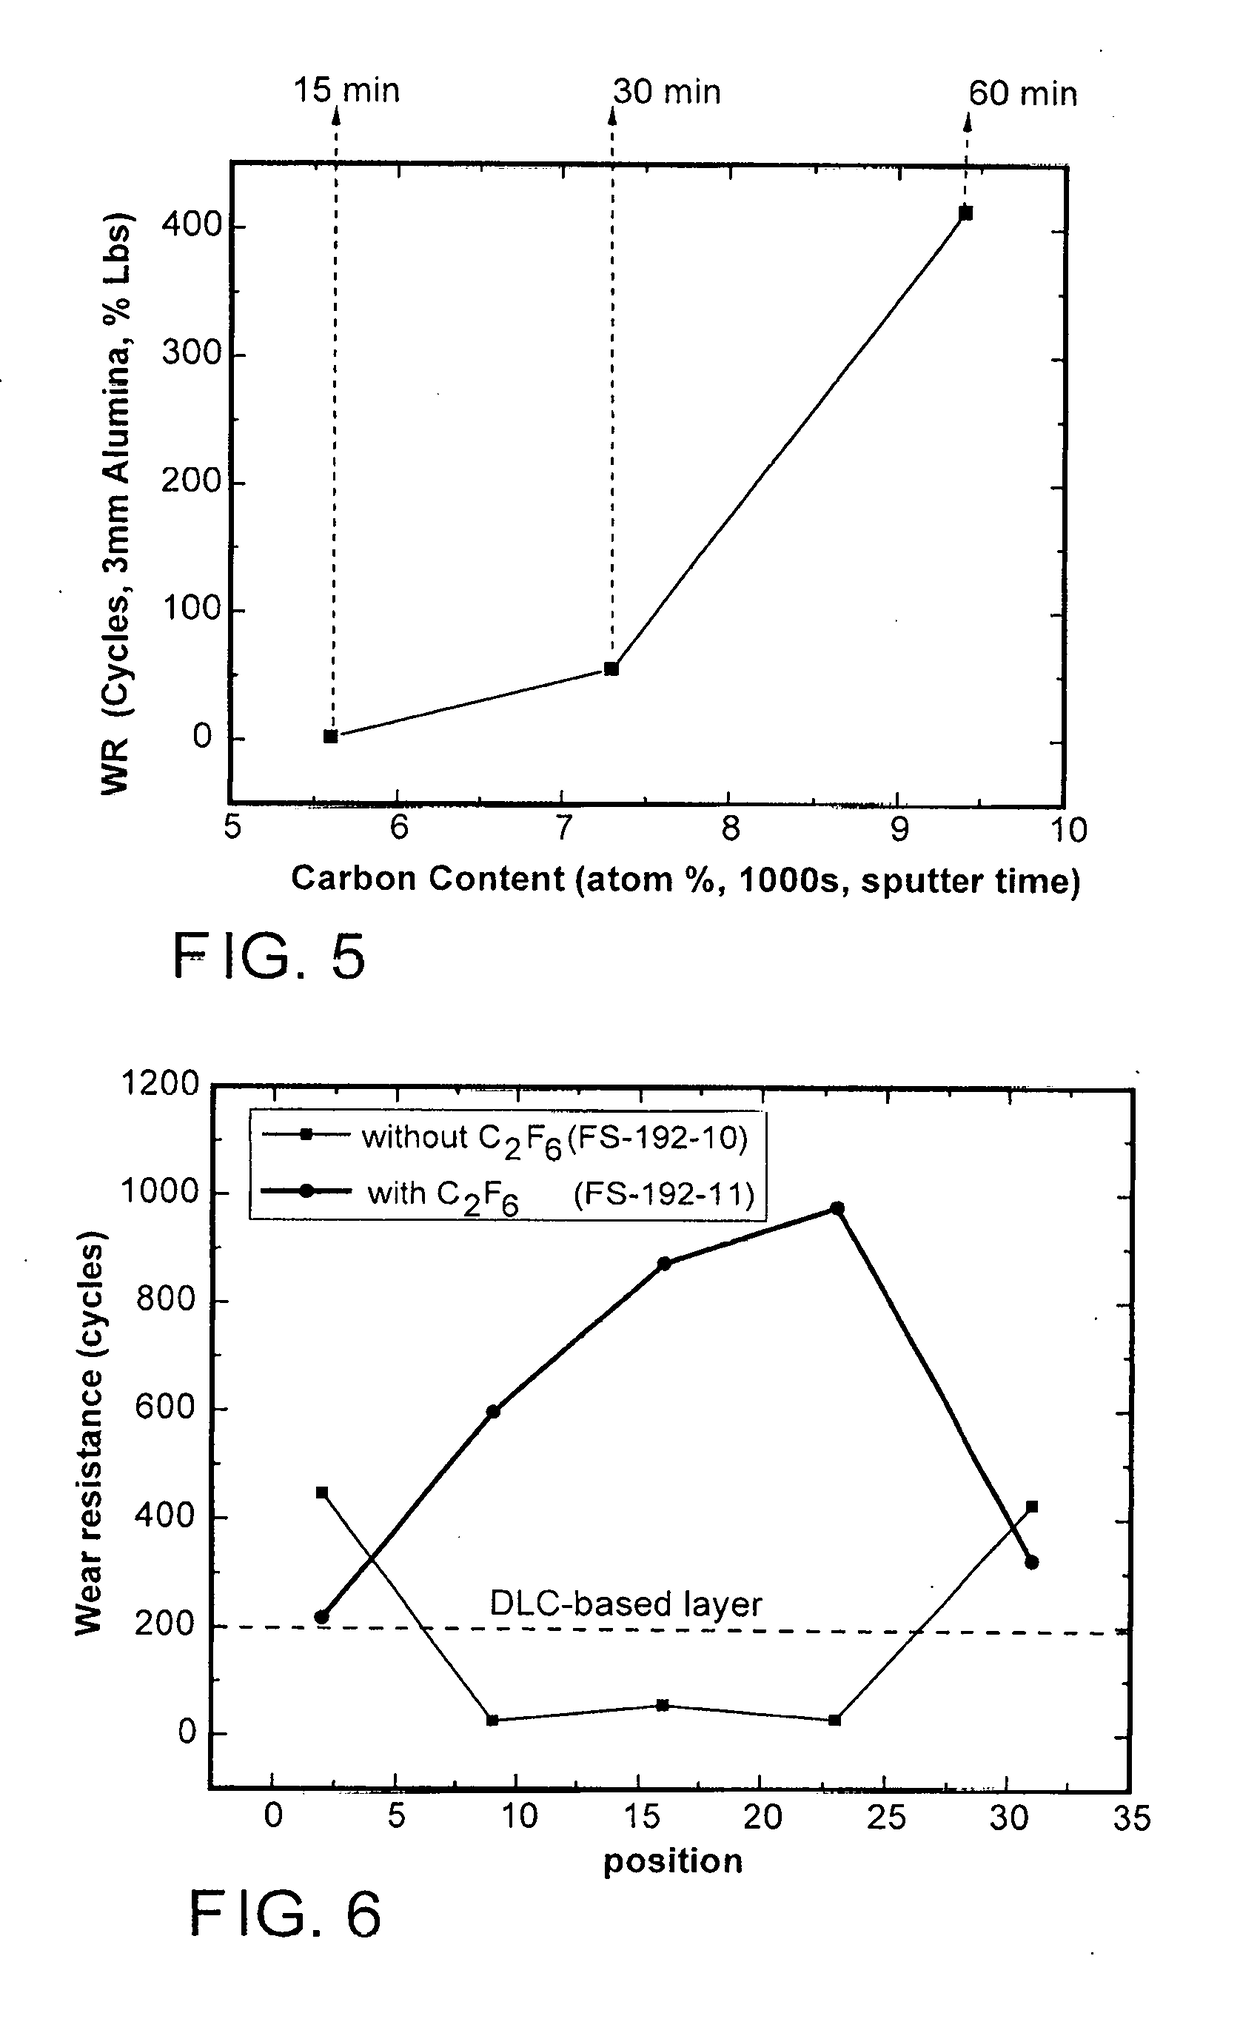 Heat treatable coated article with carbon-doped zirconium based layer(s) in coating